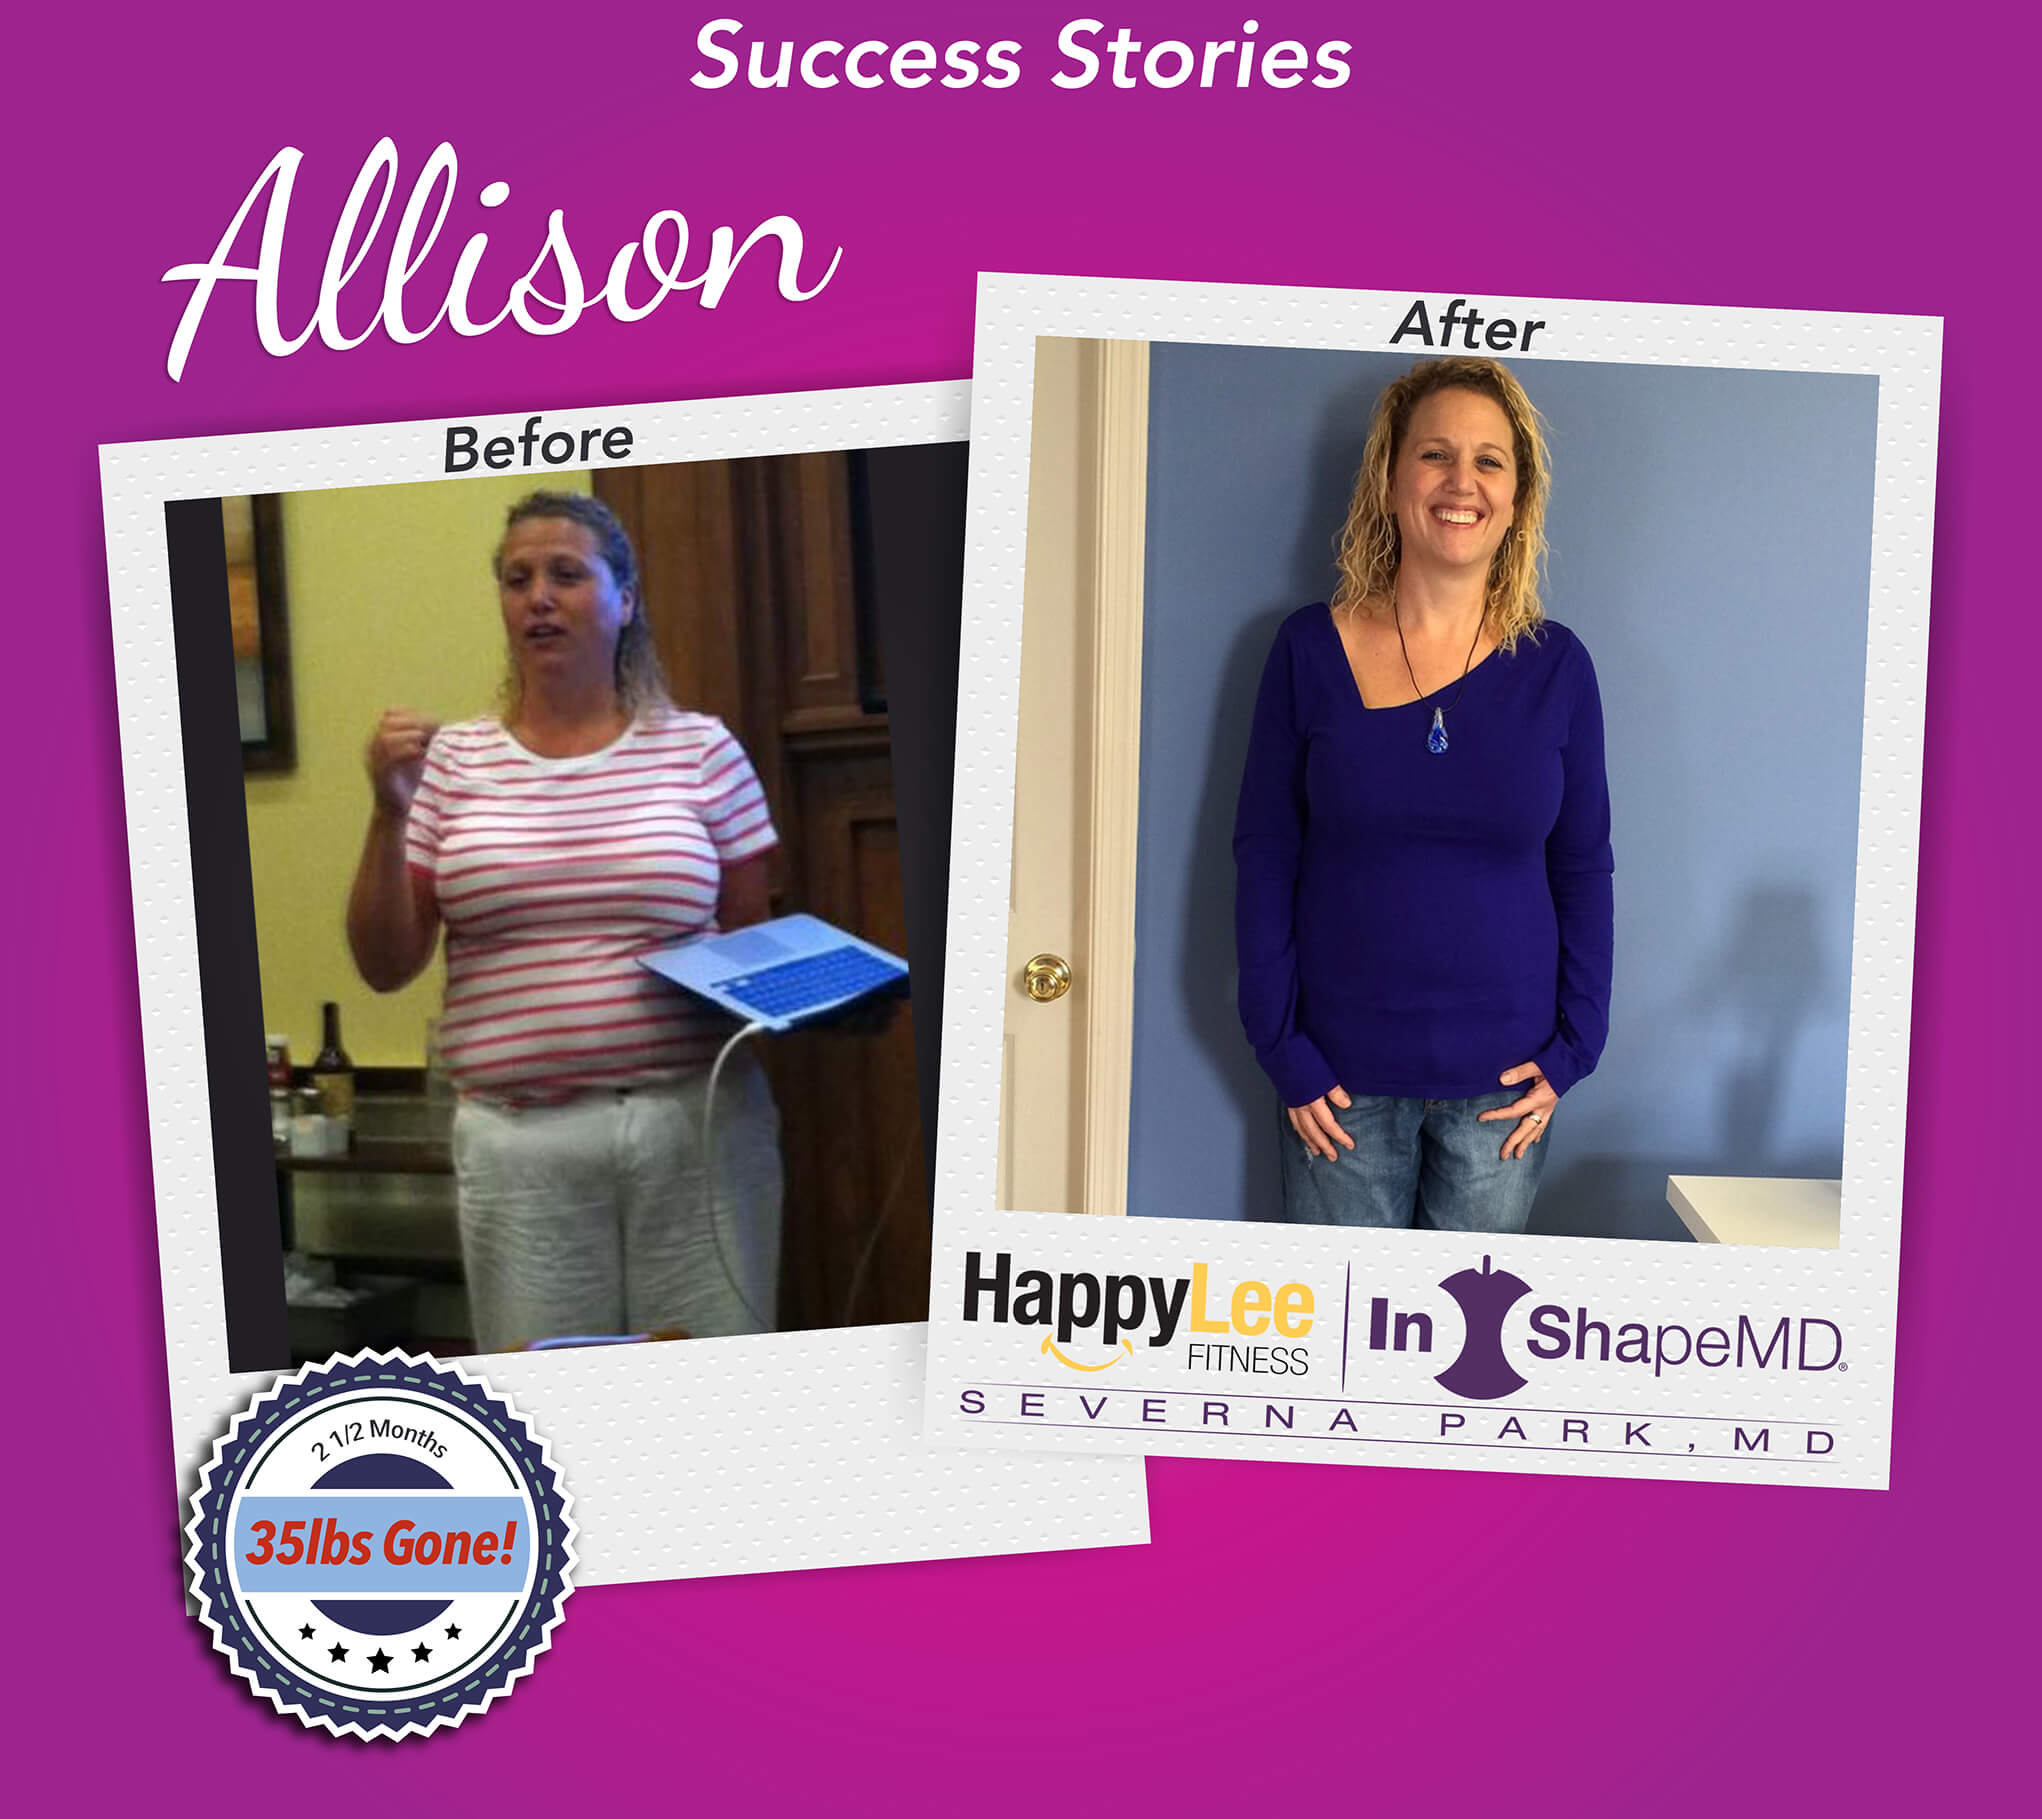 Allison Herstien Wellness at InShapeMD before and after